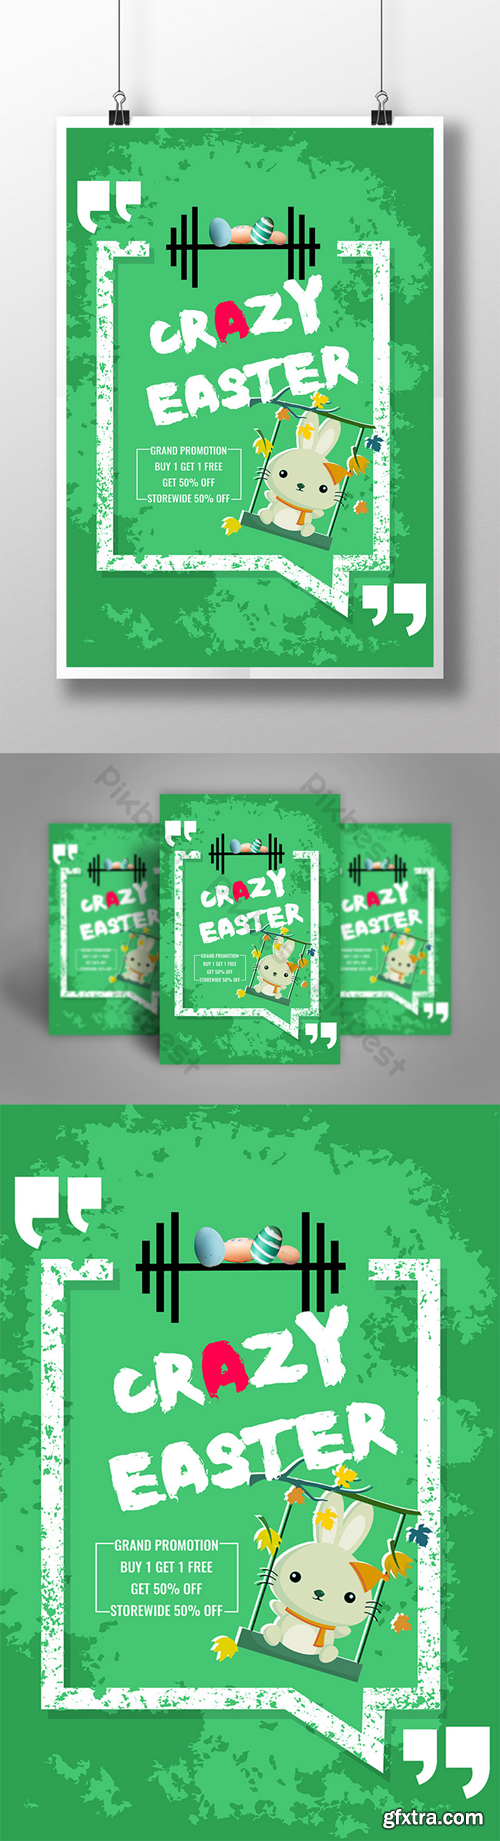 Easter holiday promotion poster Template PSD